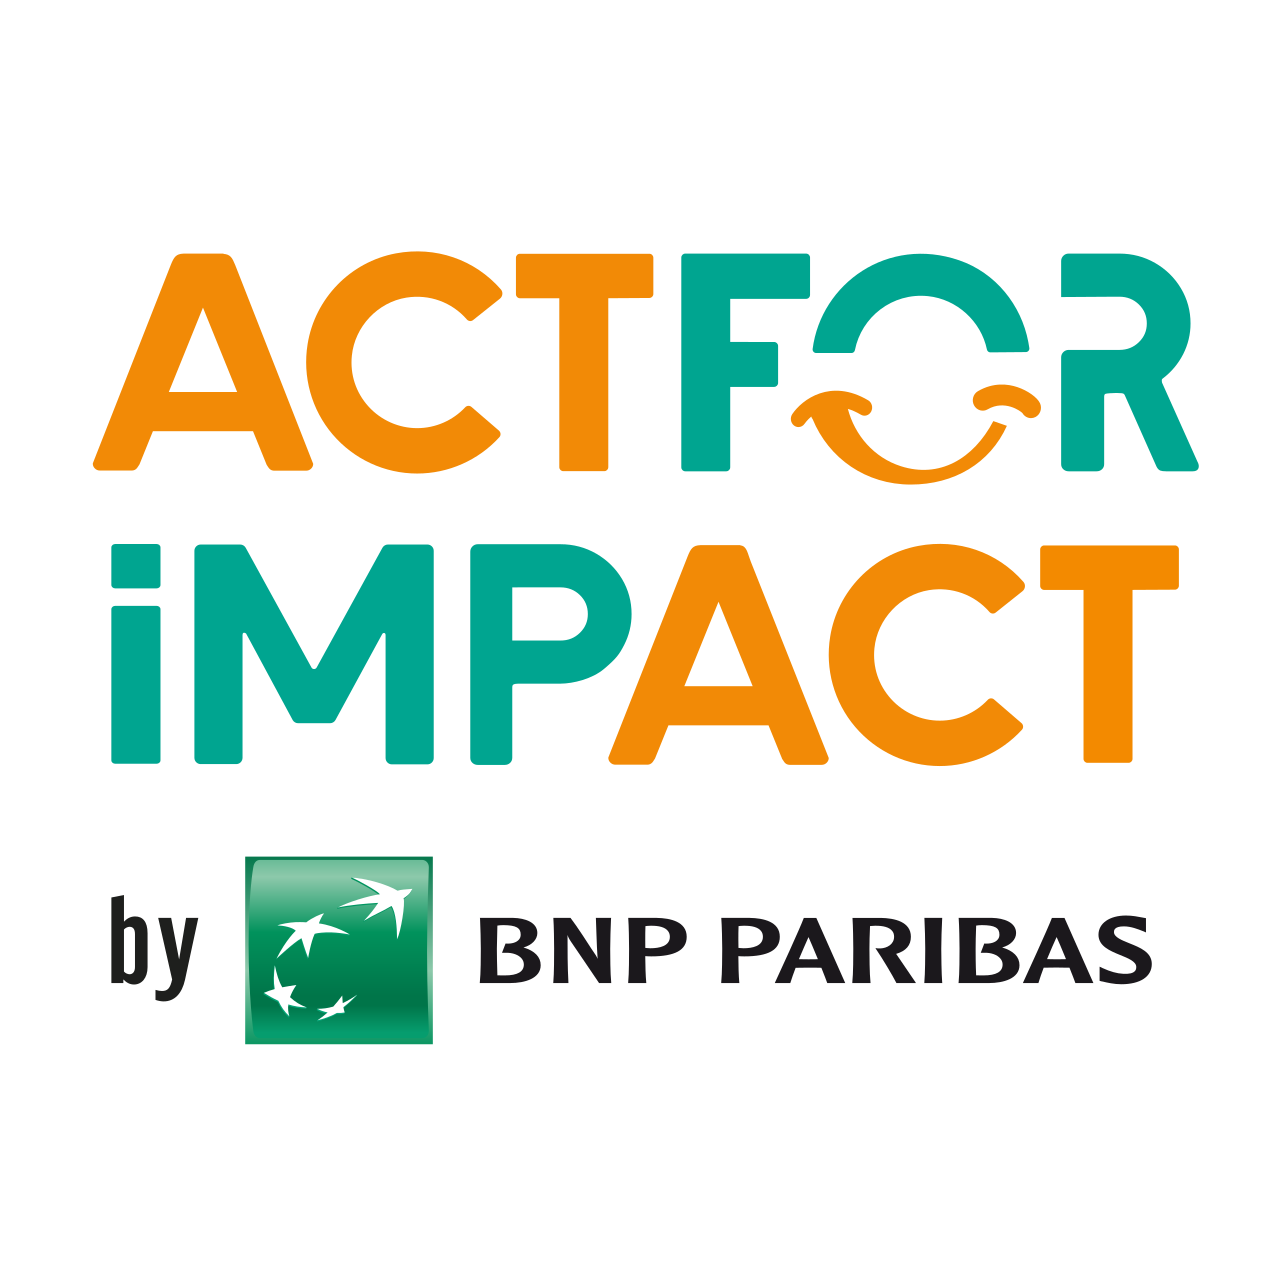 Act For Impact by BNP PARIBAS